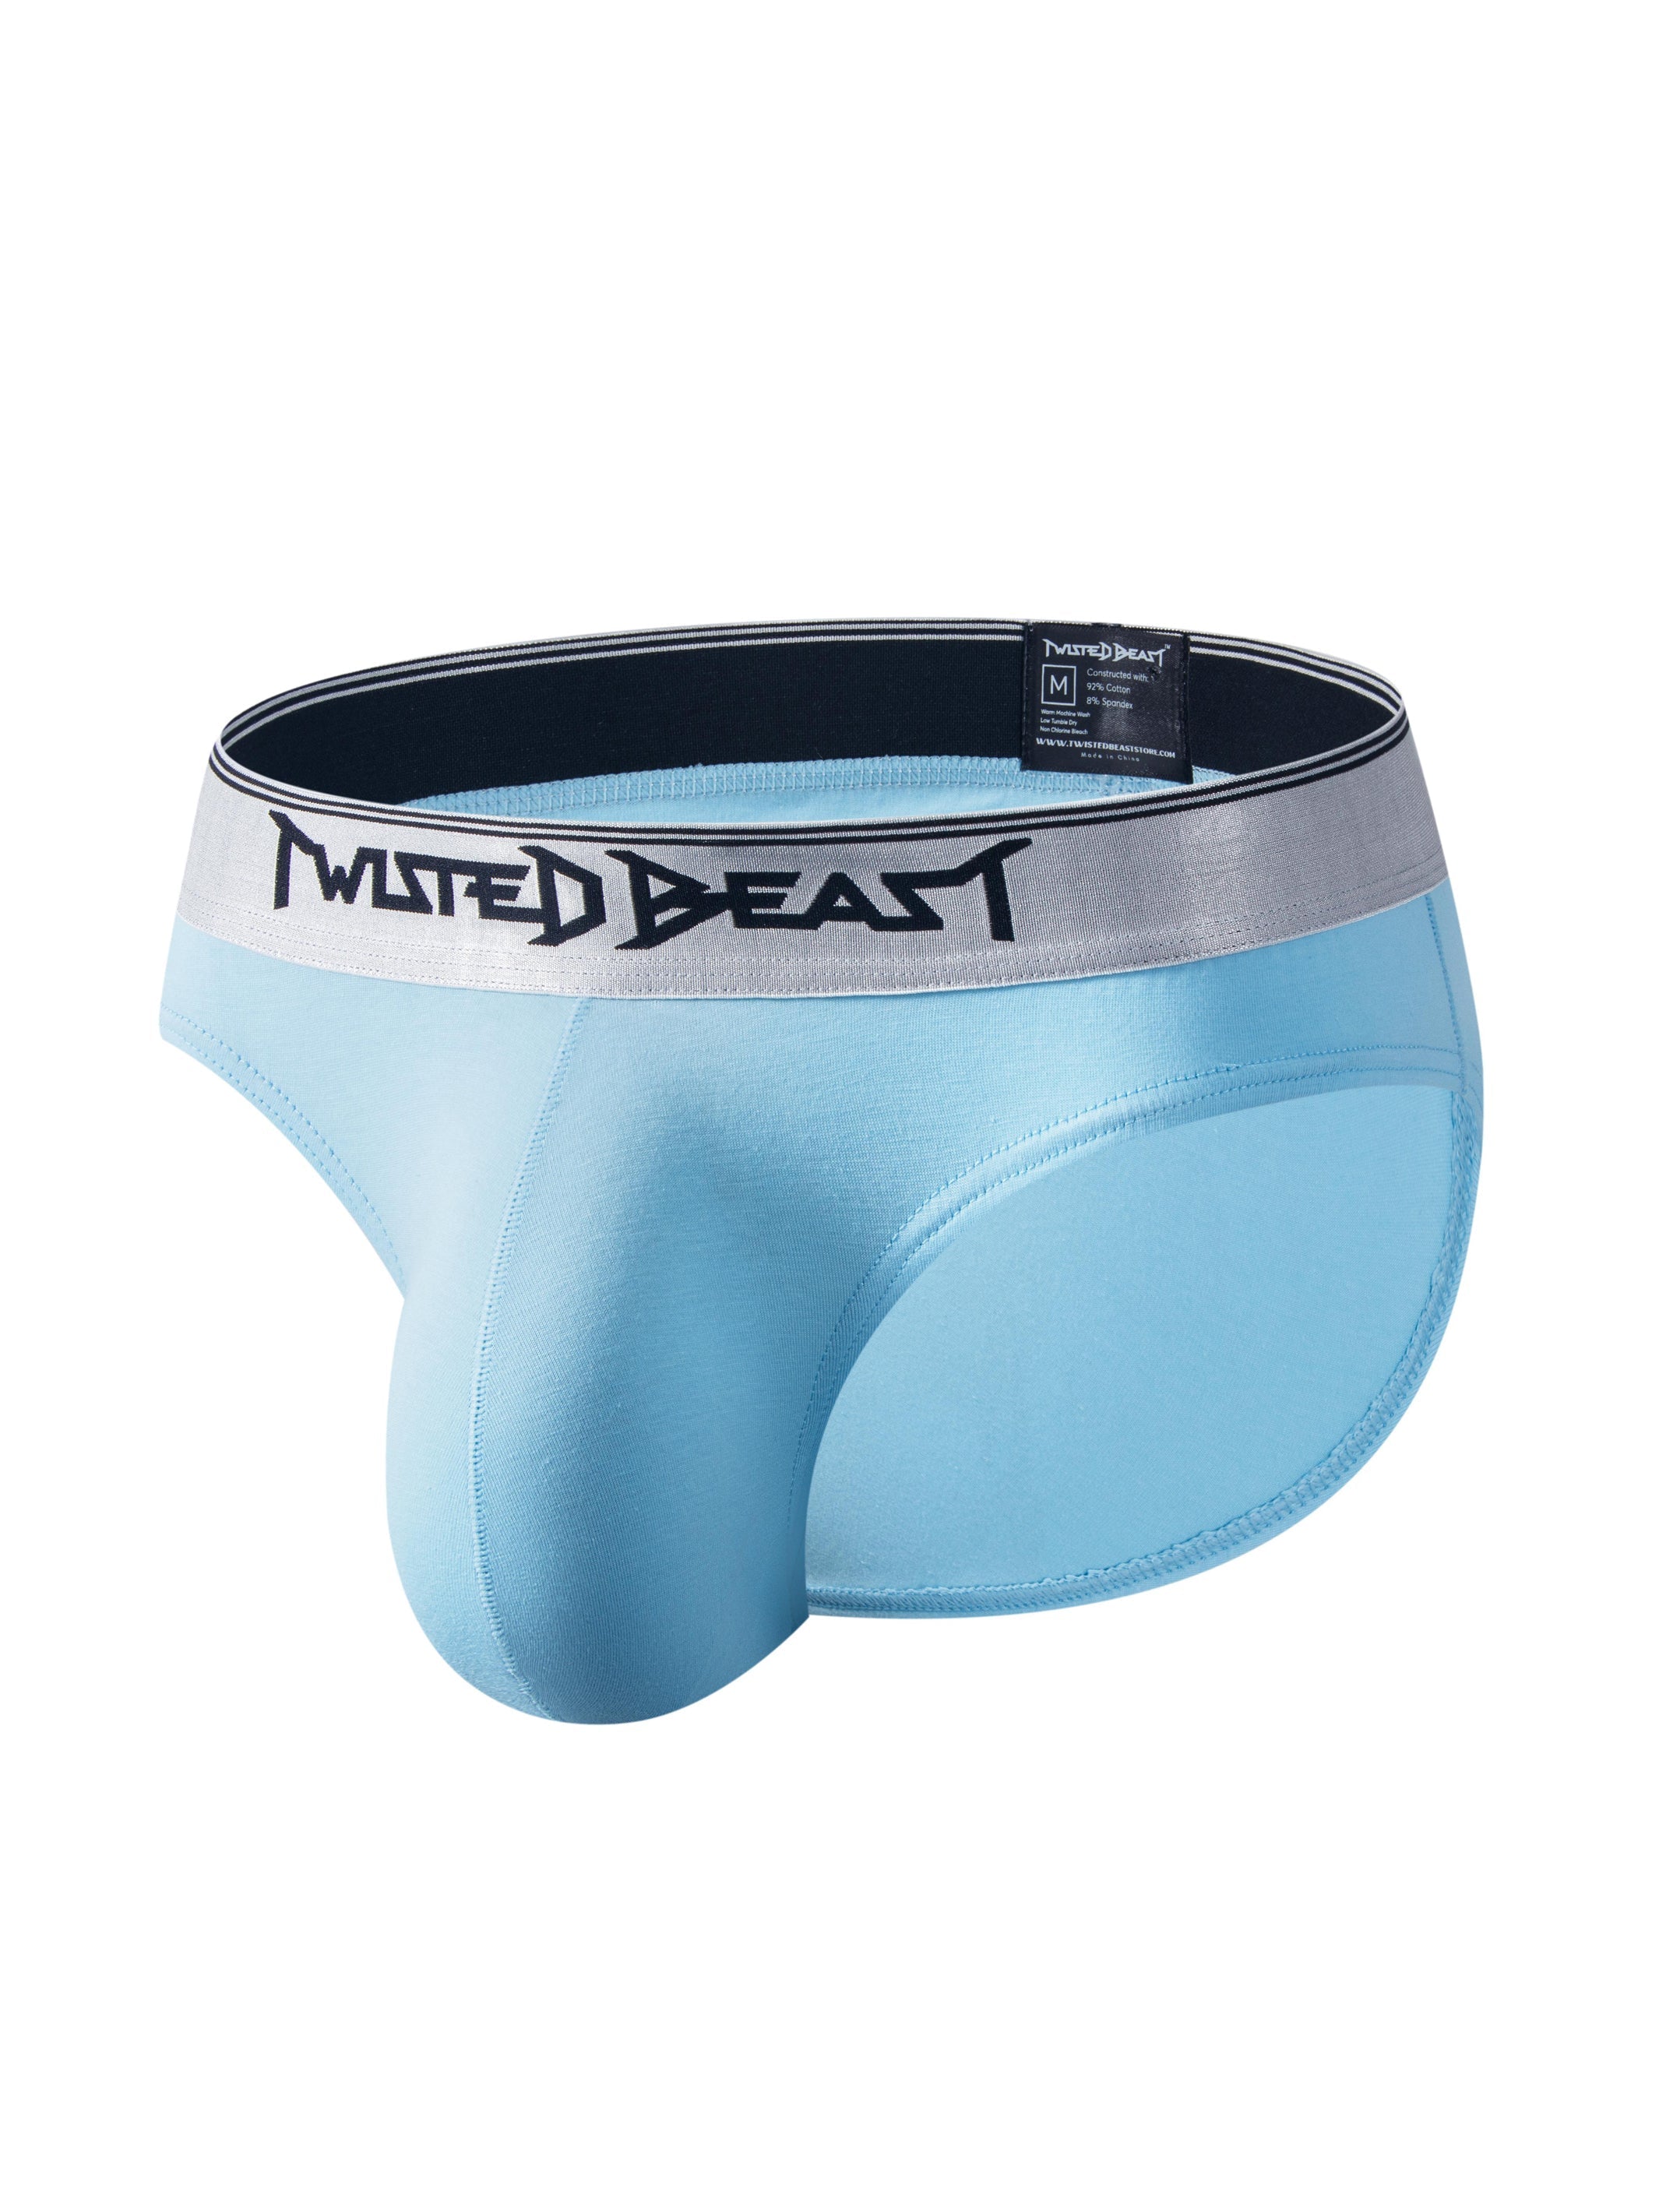 A product photo of blue Y2K Brief's by Twisted Beast.